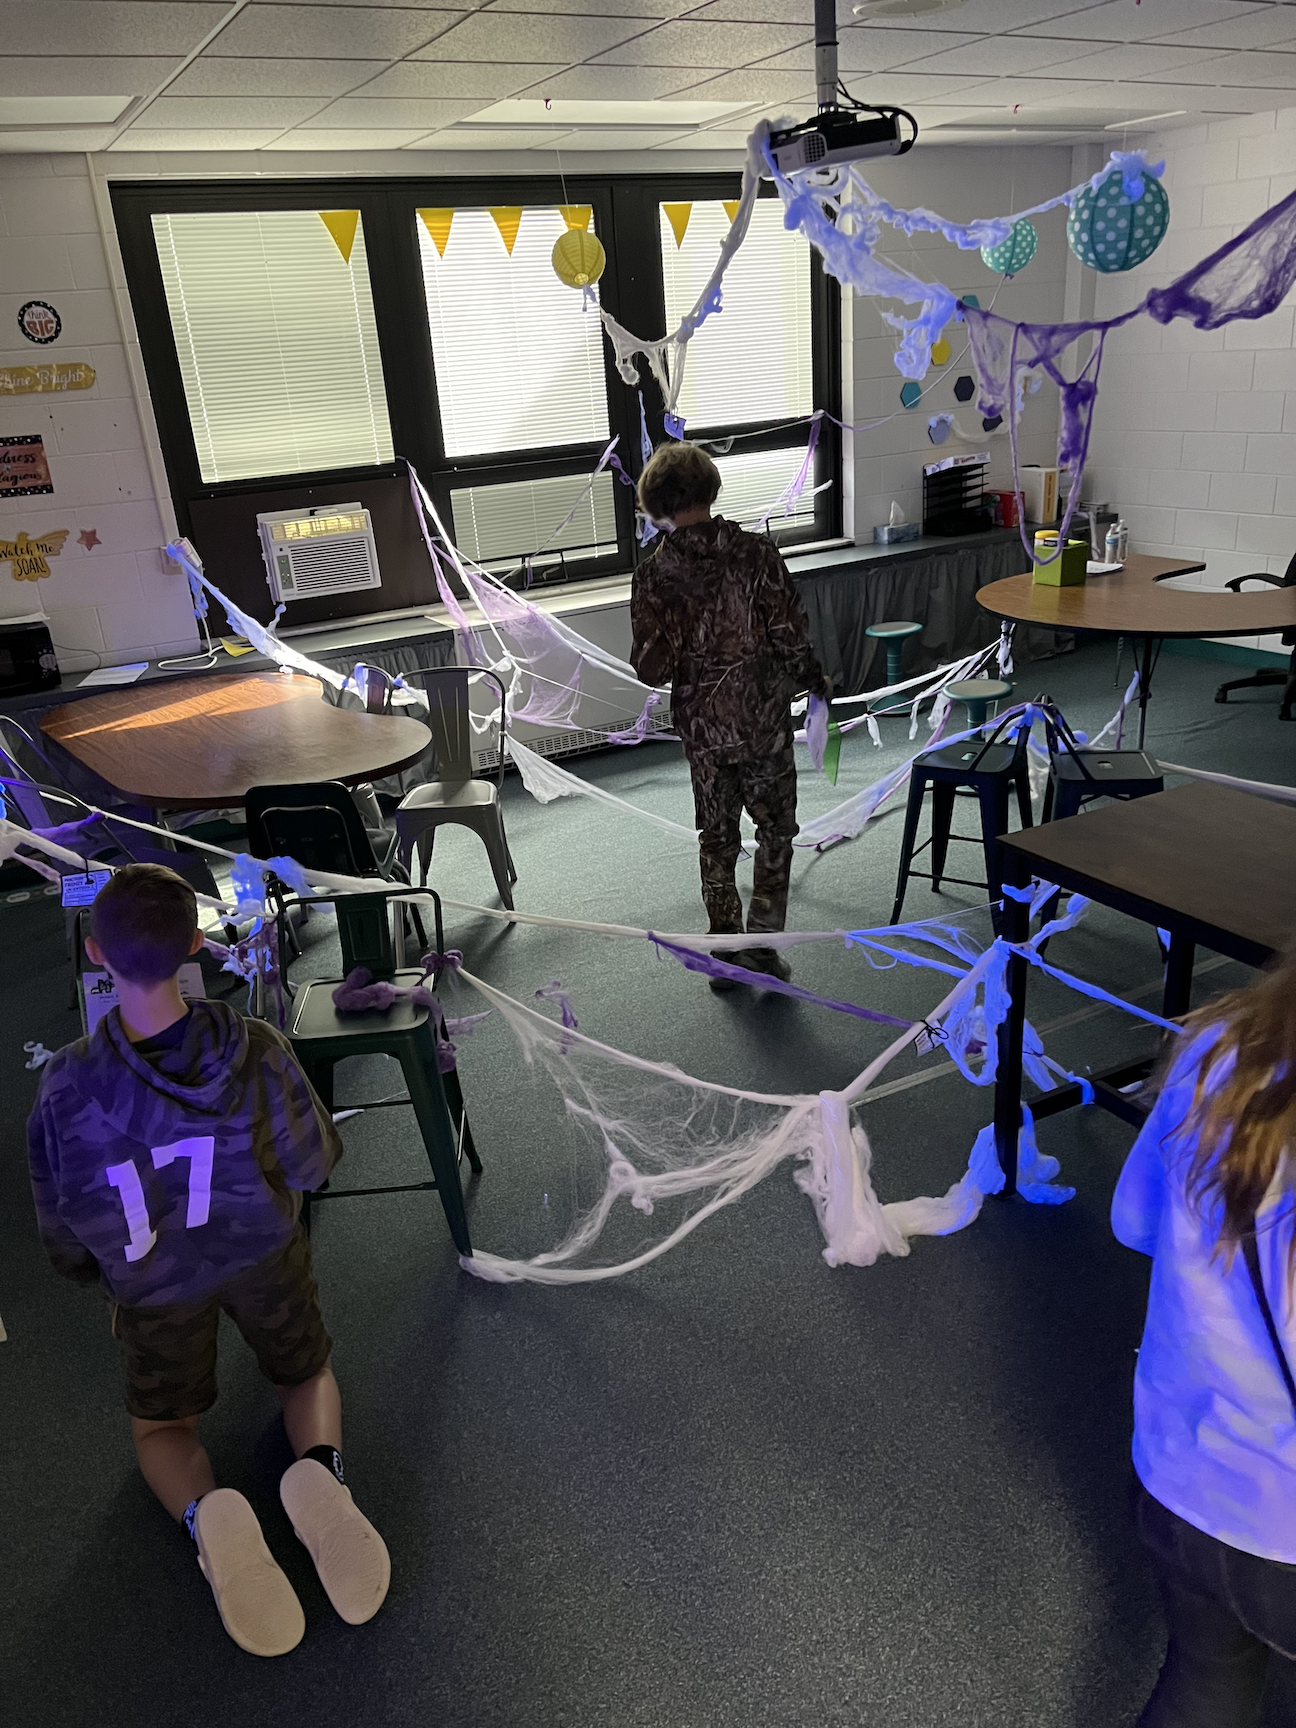 Trey Miller and CJ Gimigliano weave through the webs to solve math problems